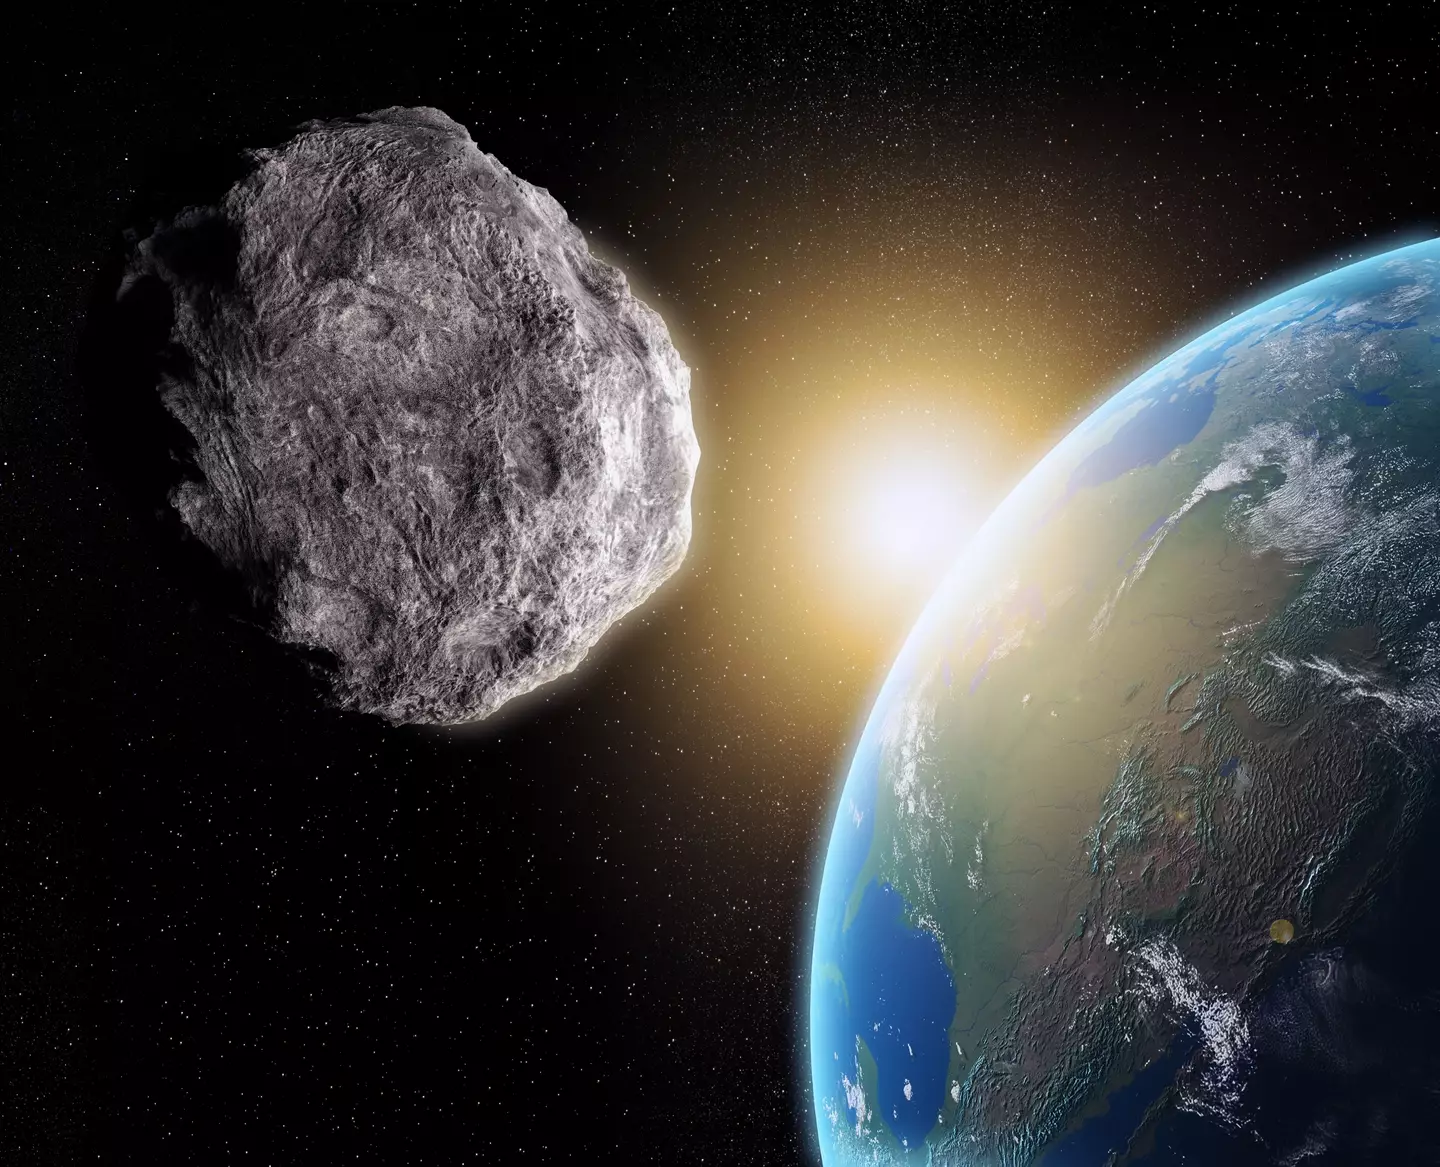 NASA assures us that the asteroid doesn't pose a risk to humanity.